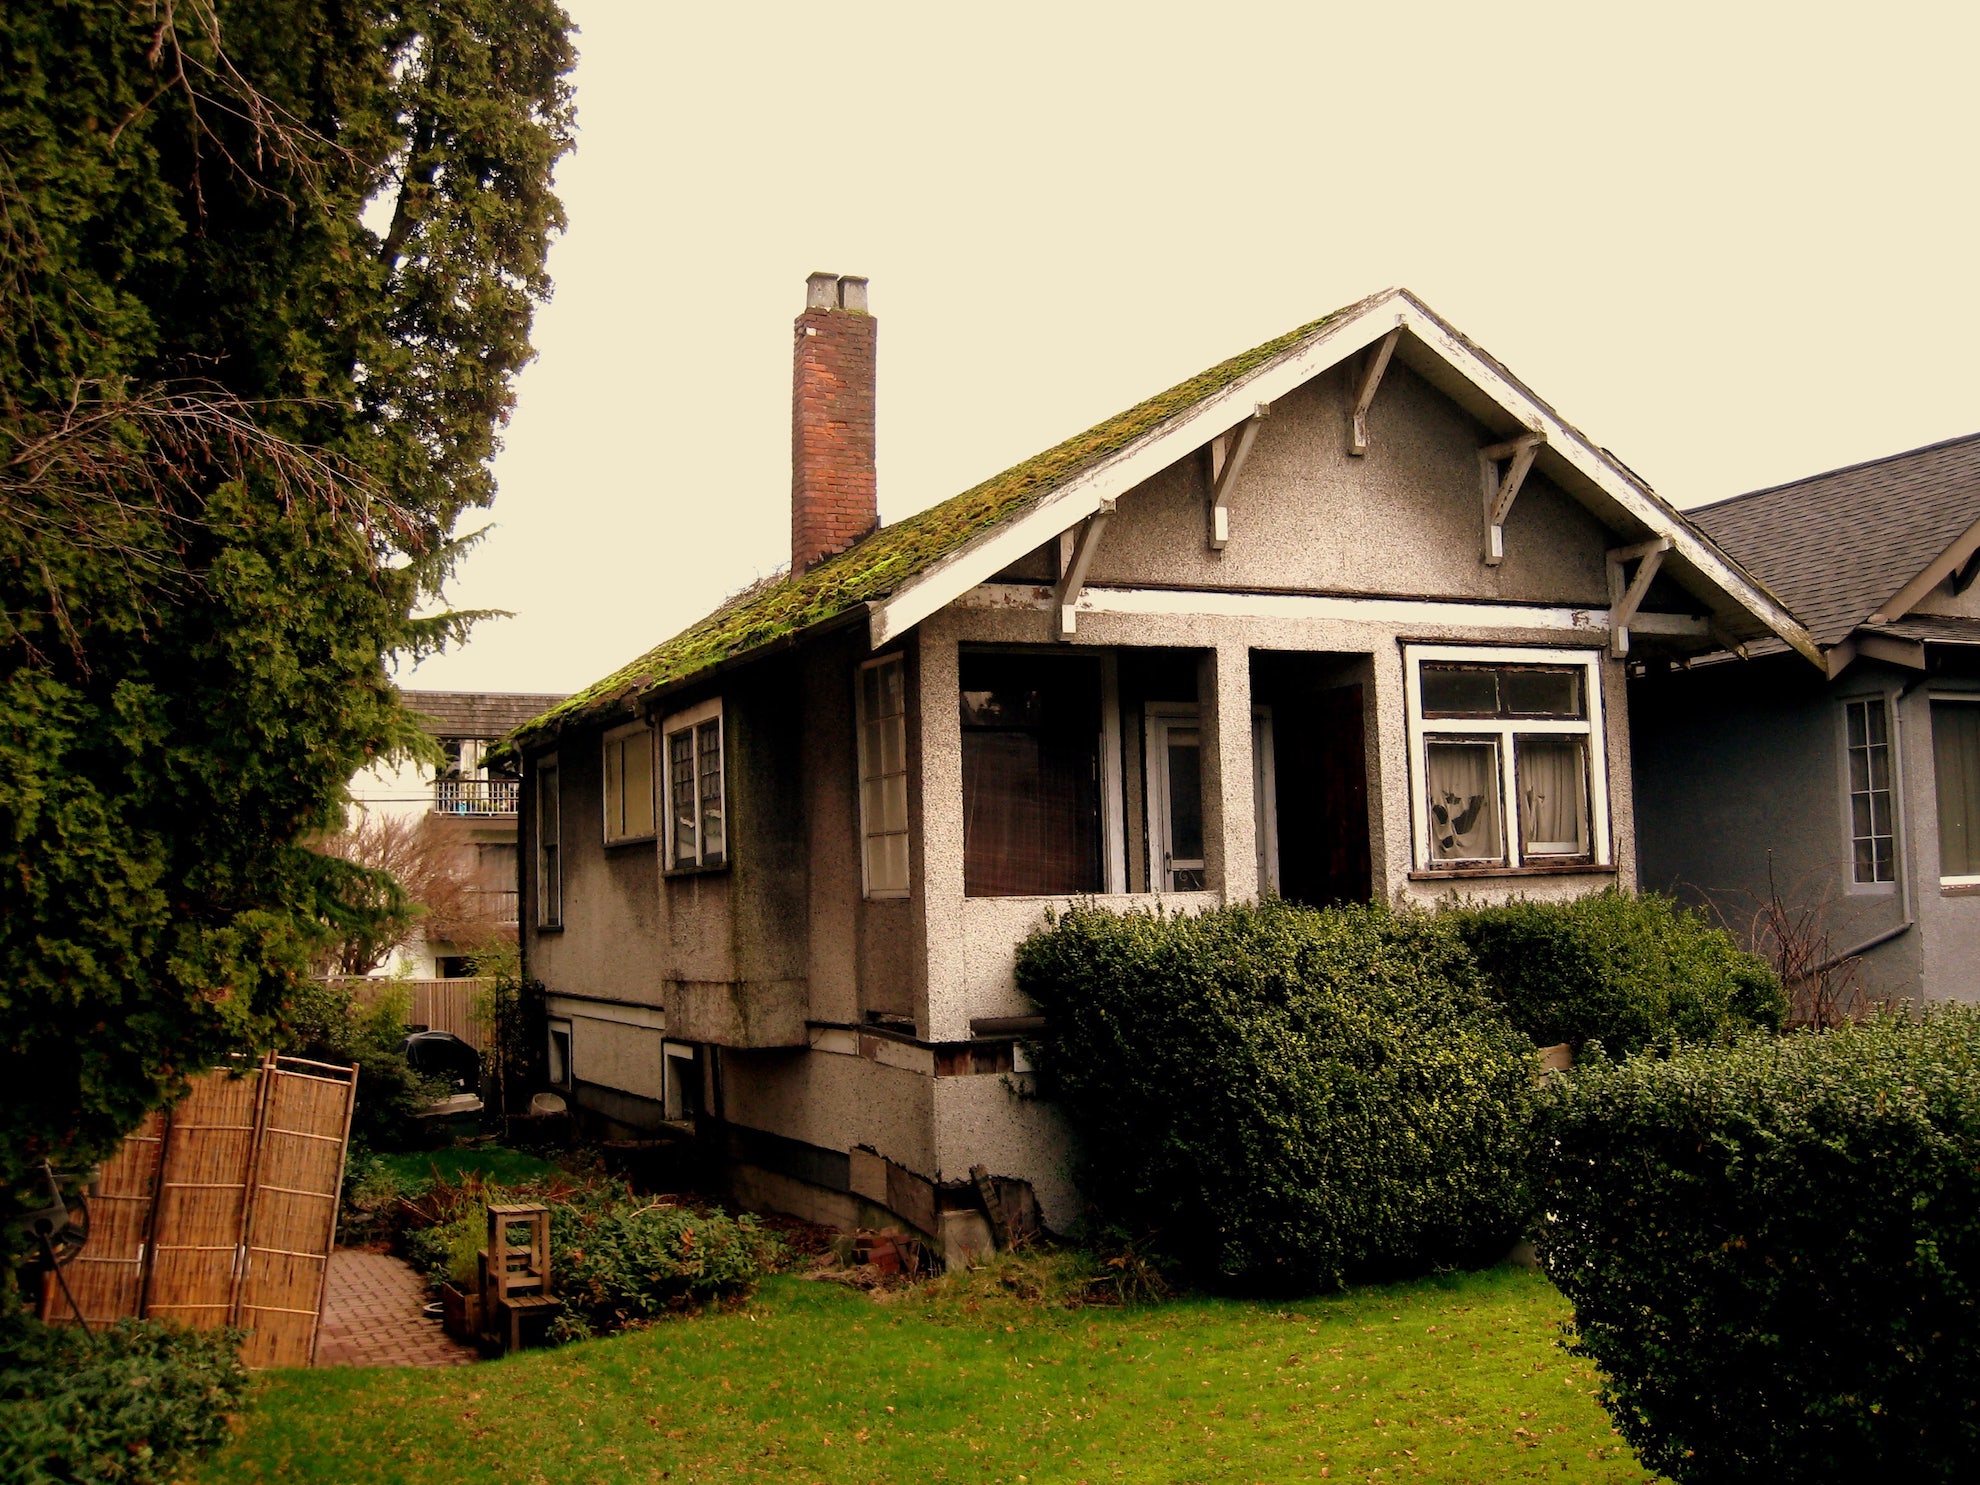 Vancouver Real Estate Composite Gets Another Downtick In December